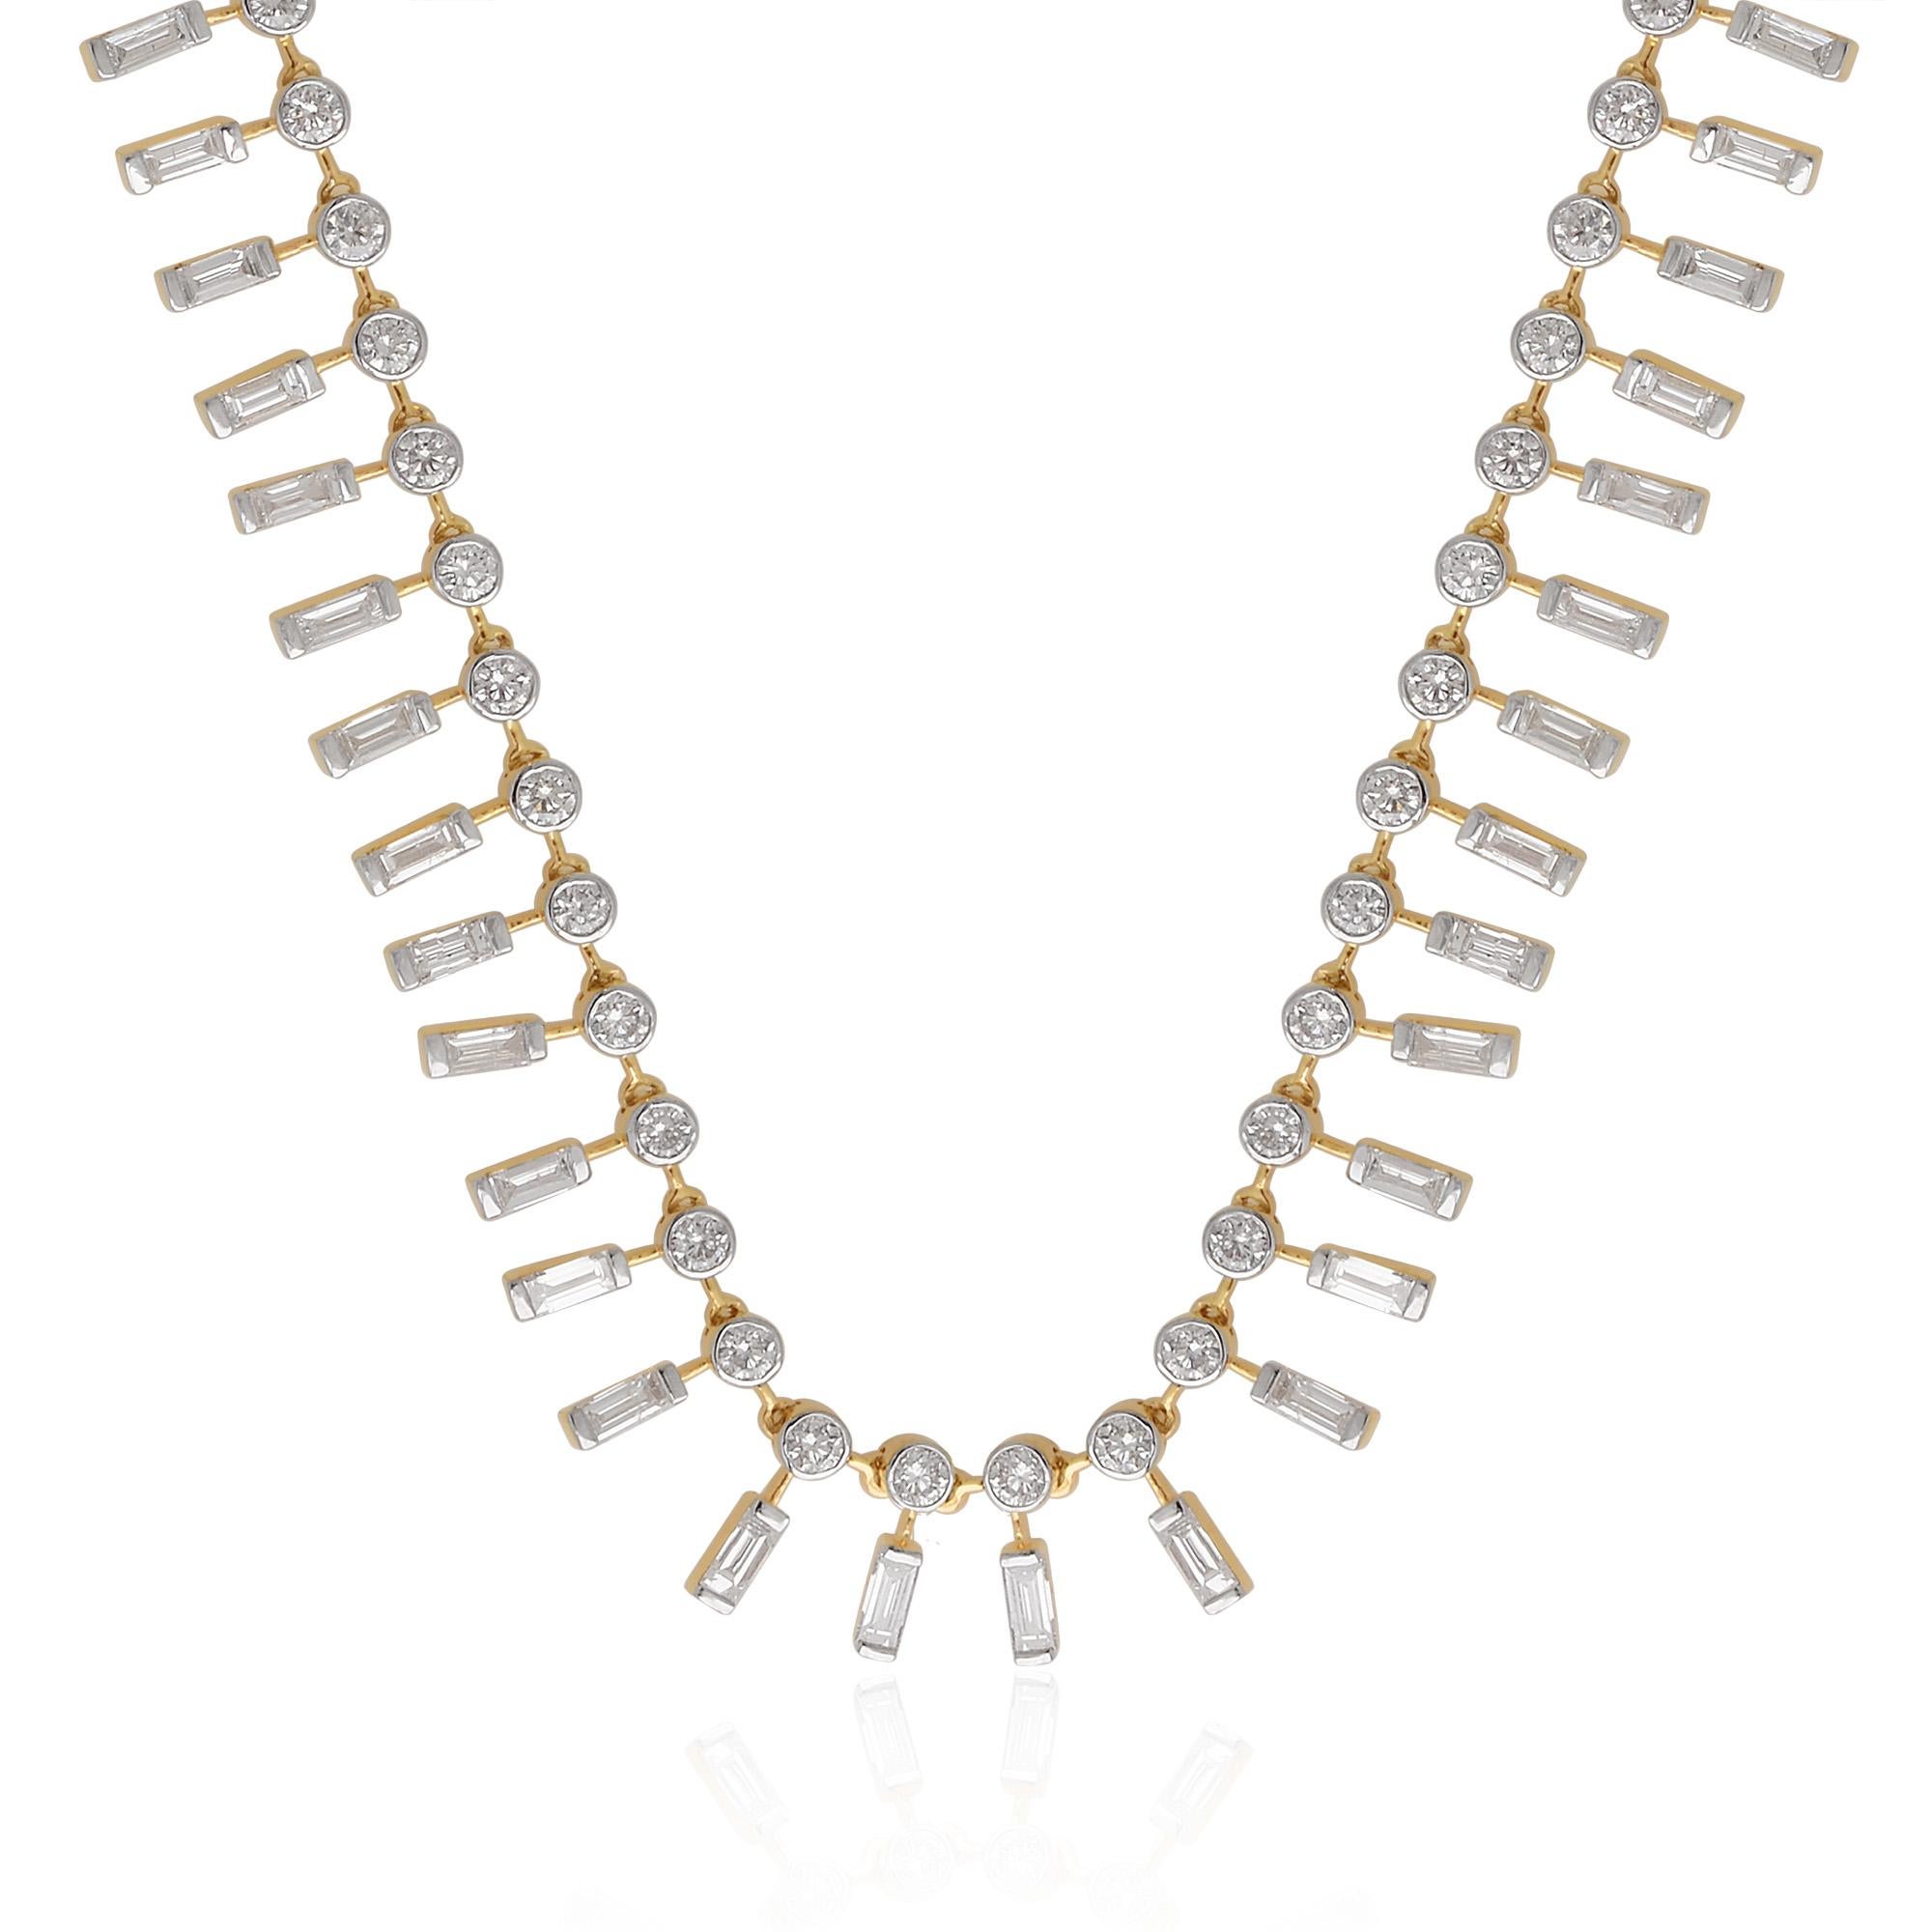 A necklace featuring 7.20 carat baguette and round diamonds in 18 karat yellow gold is a stunning and eye-catching piece of fine jewelry. The necklace typically showcases a combination of baguette-cut and round-cut diamonds as charms or pendant